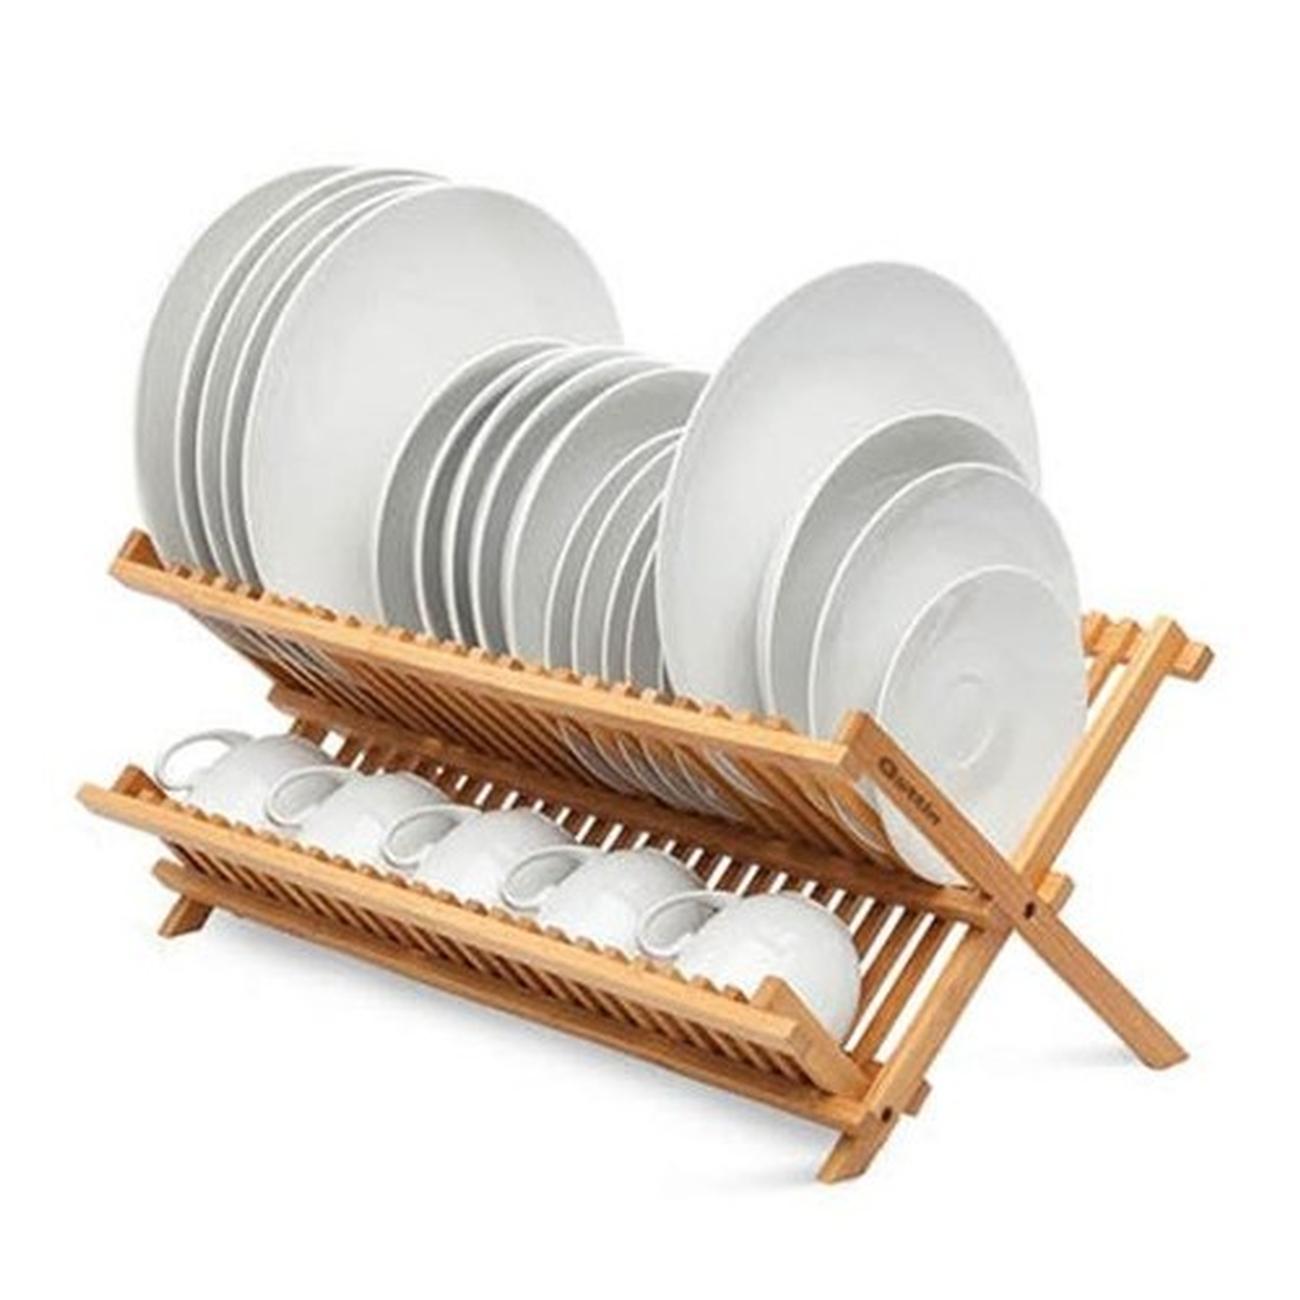 https://www.thekitchenwhisk.ie/contentfiles/productImages/Large/Bamboo-Dish-Rack-Drainer.jpg